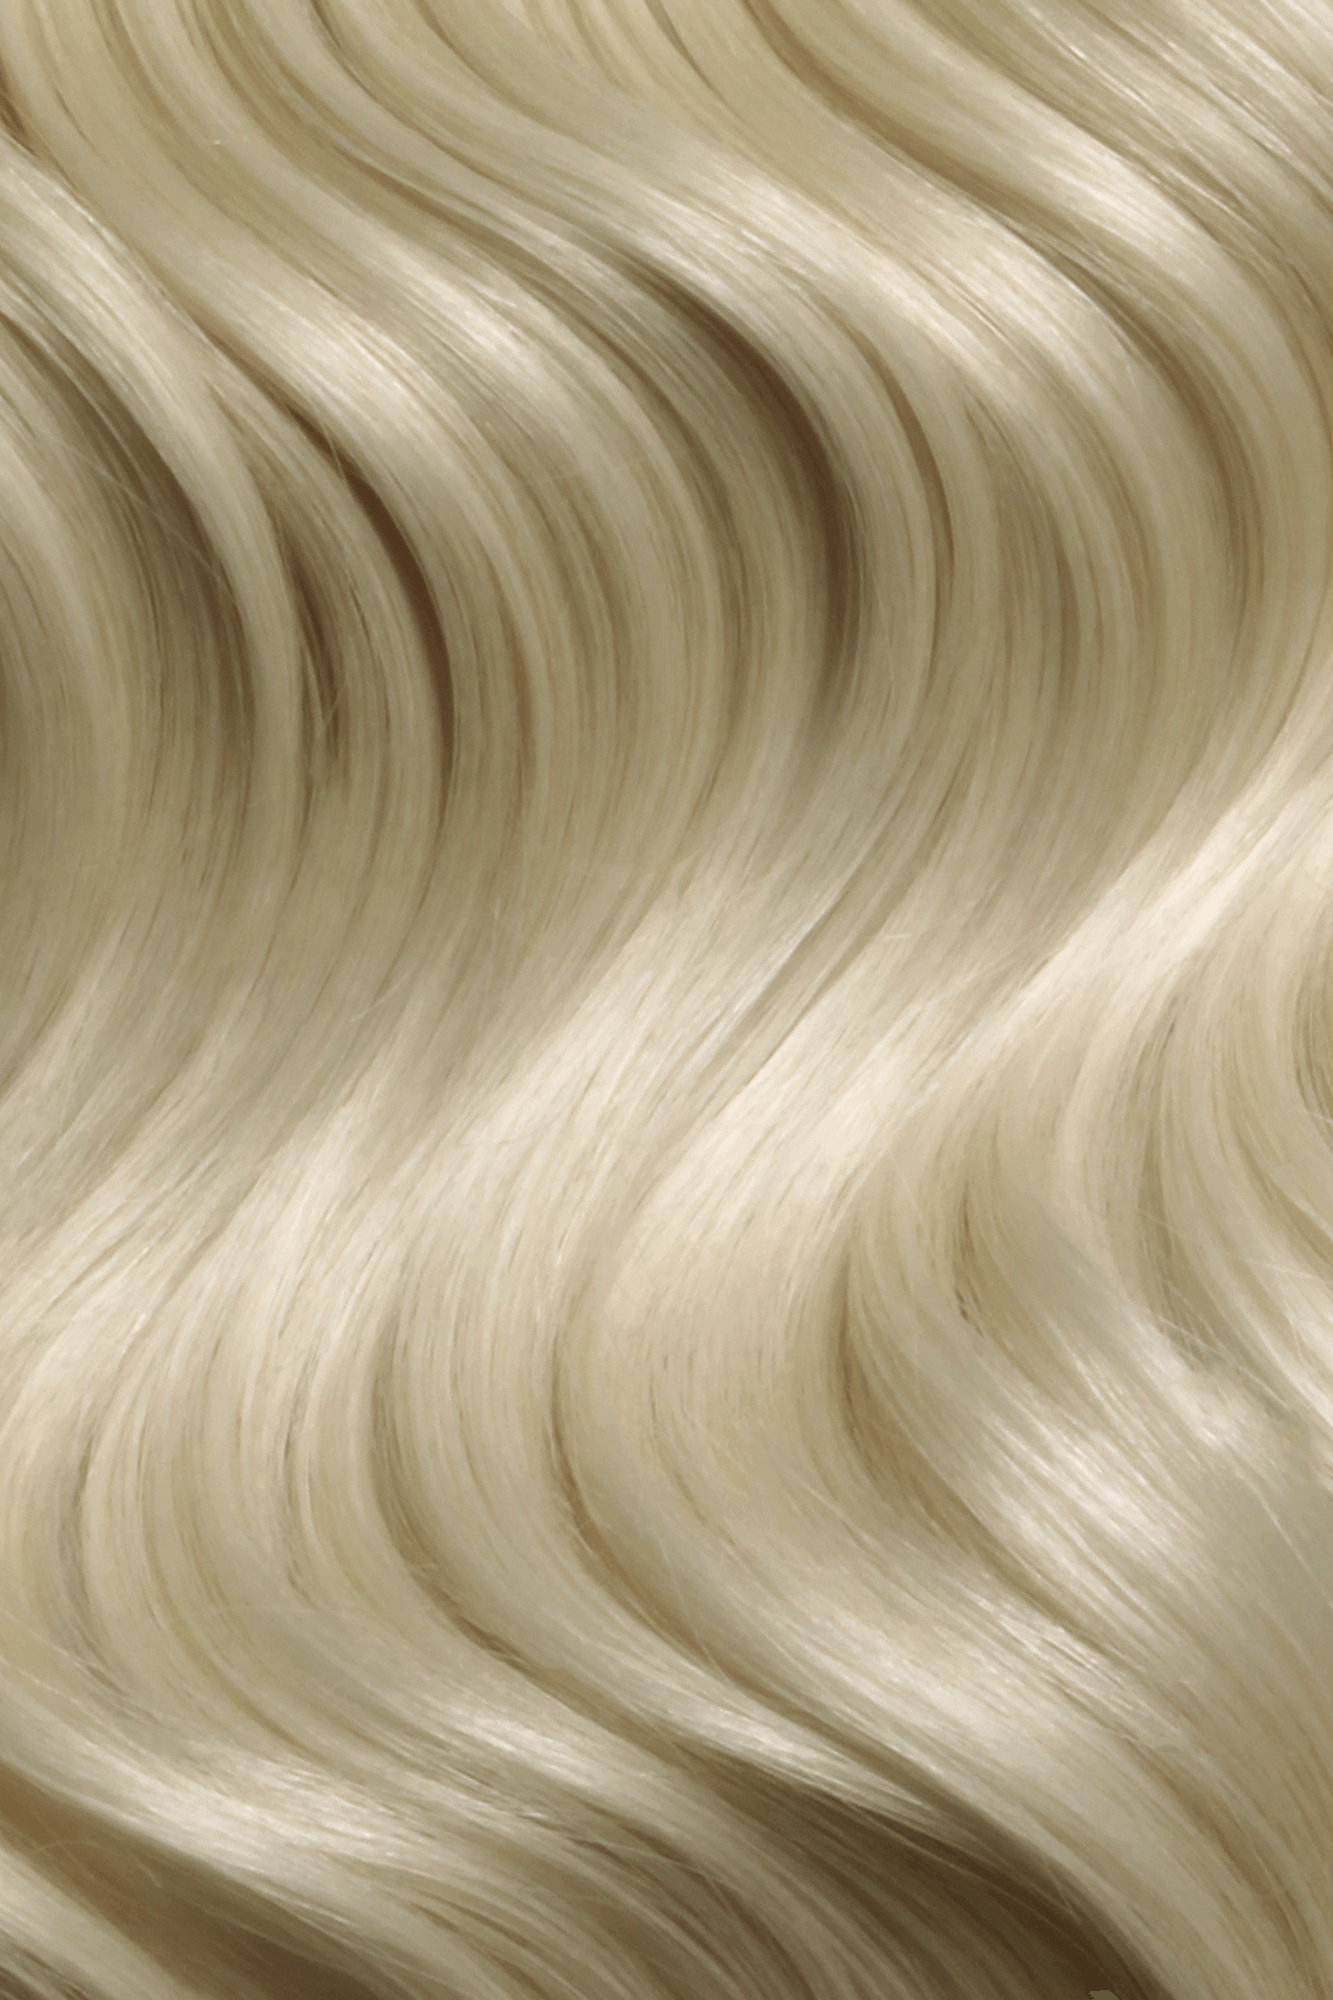 SEAMLESS® Tapes 16 Inches - SWAY Hair Extensions Sandy-Blonde-60 clip-in hair extensions made of 100% Double Drawn, Remy Human Hair. SWAY SEAMLESS® Tapes, 16 inches. Lightweight, flexible, and perfect for any hairstyle.